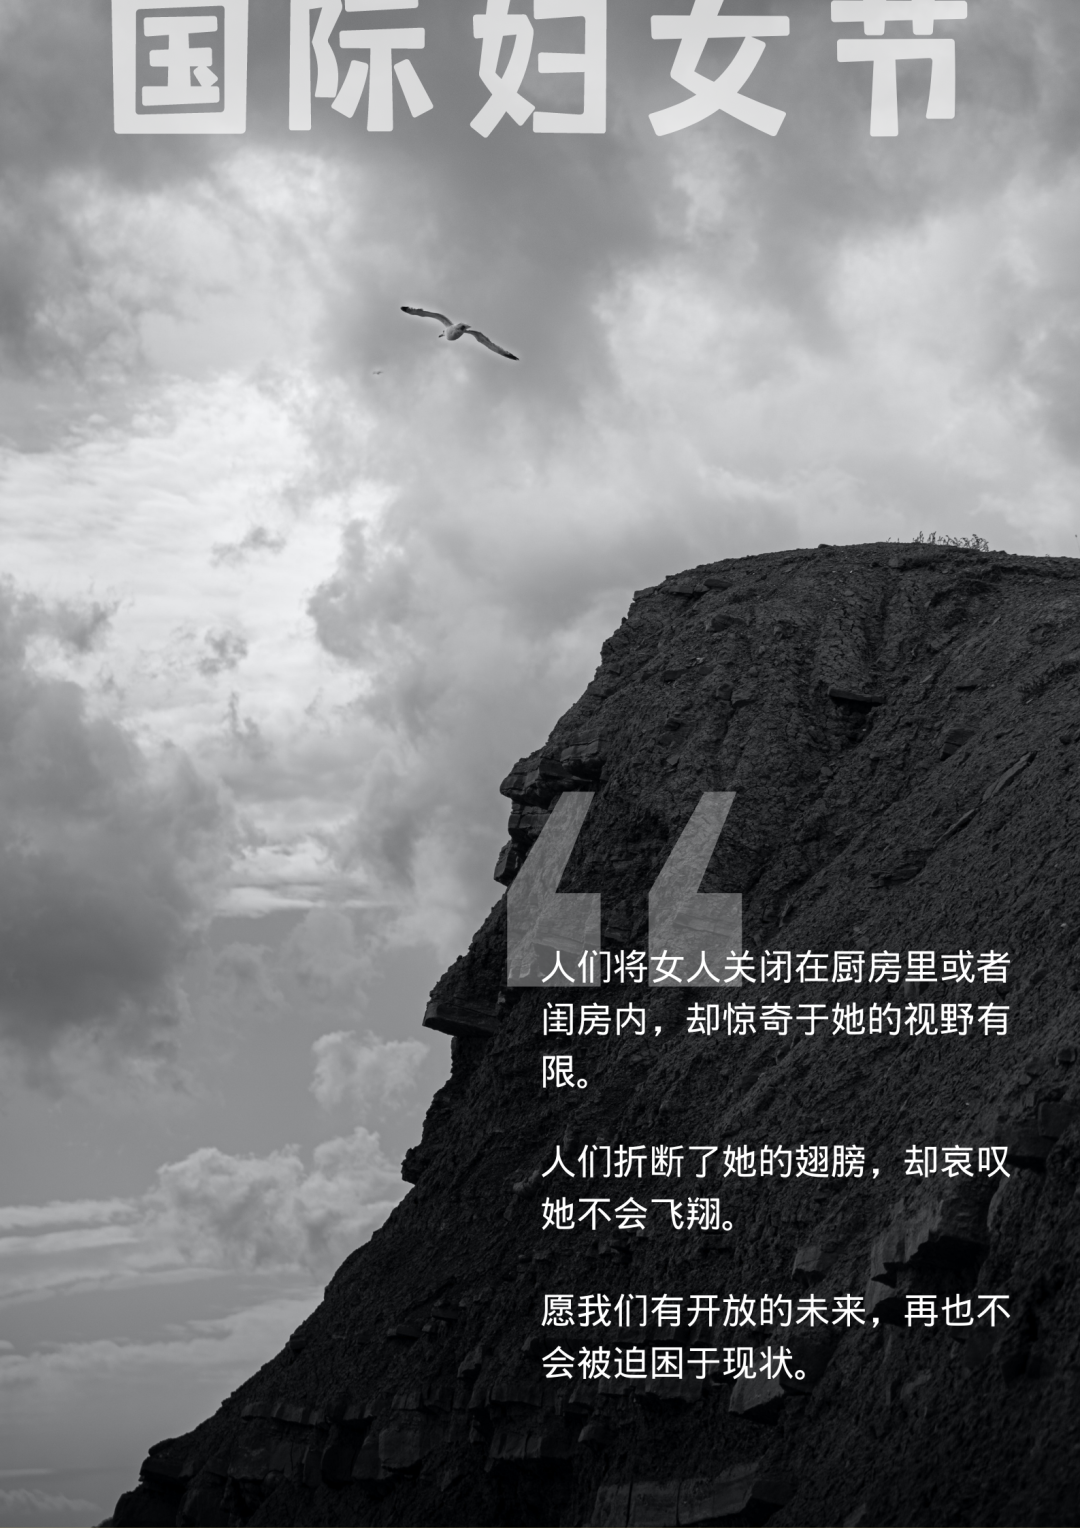 A monochrome image of a cliff against a stormy sky with a seagull flying in the upper-left corner.